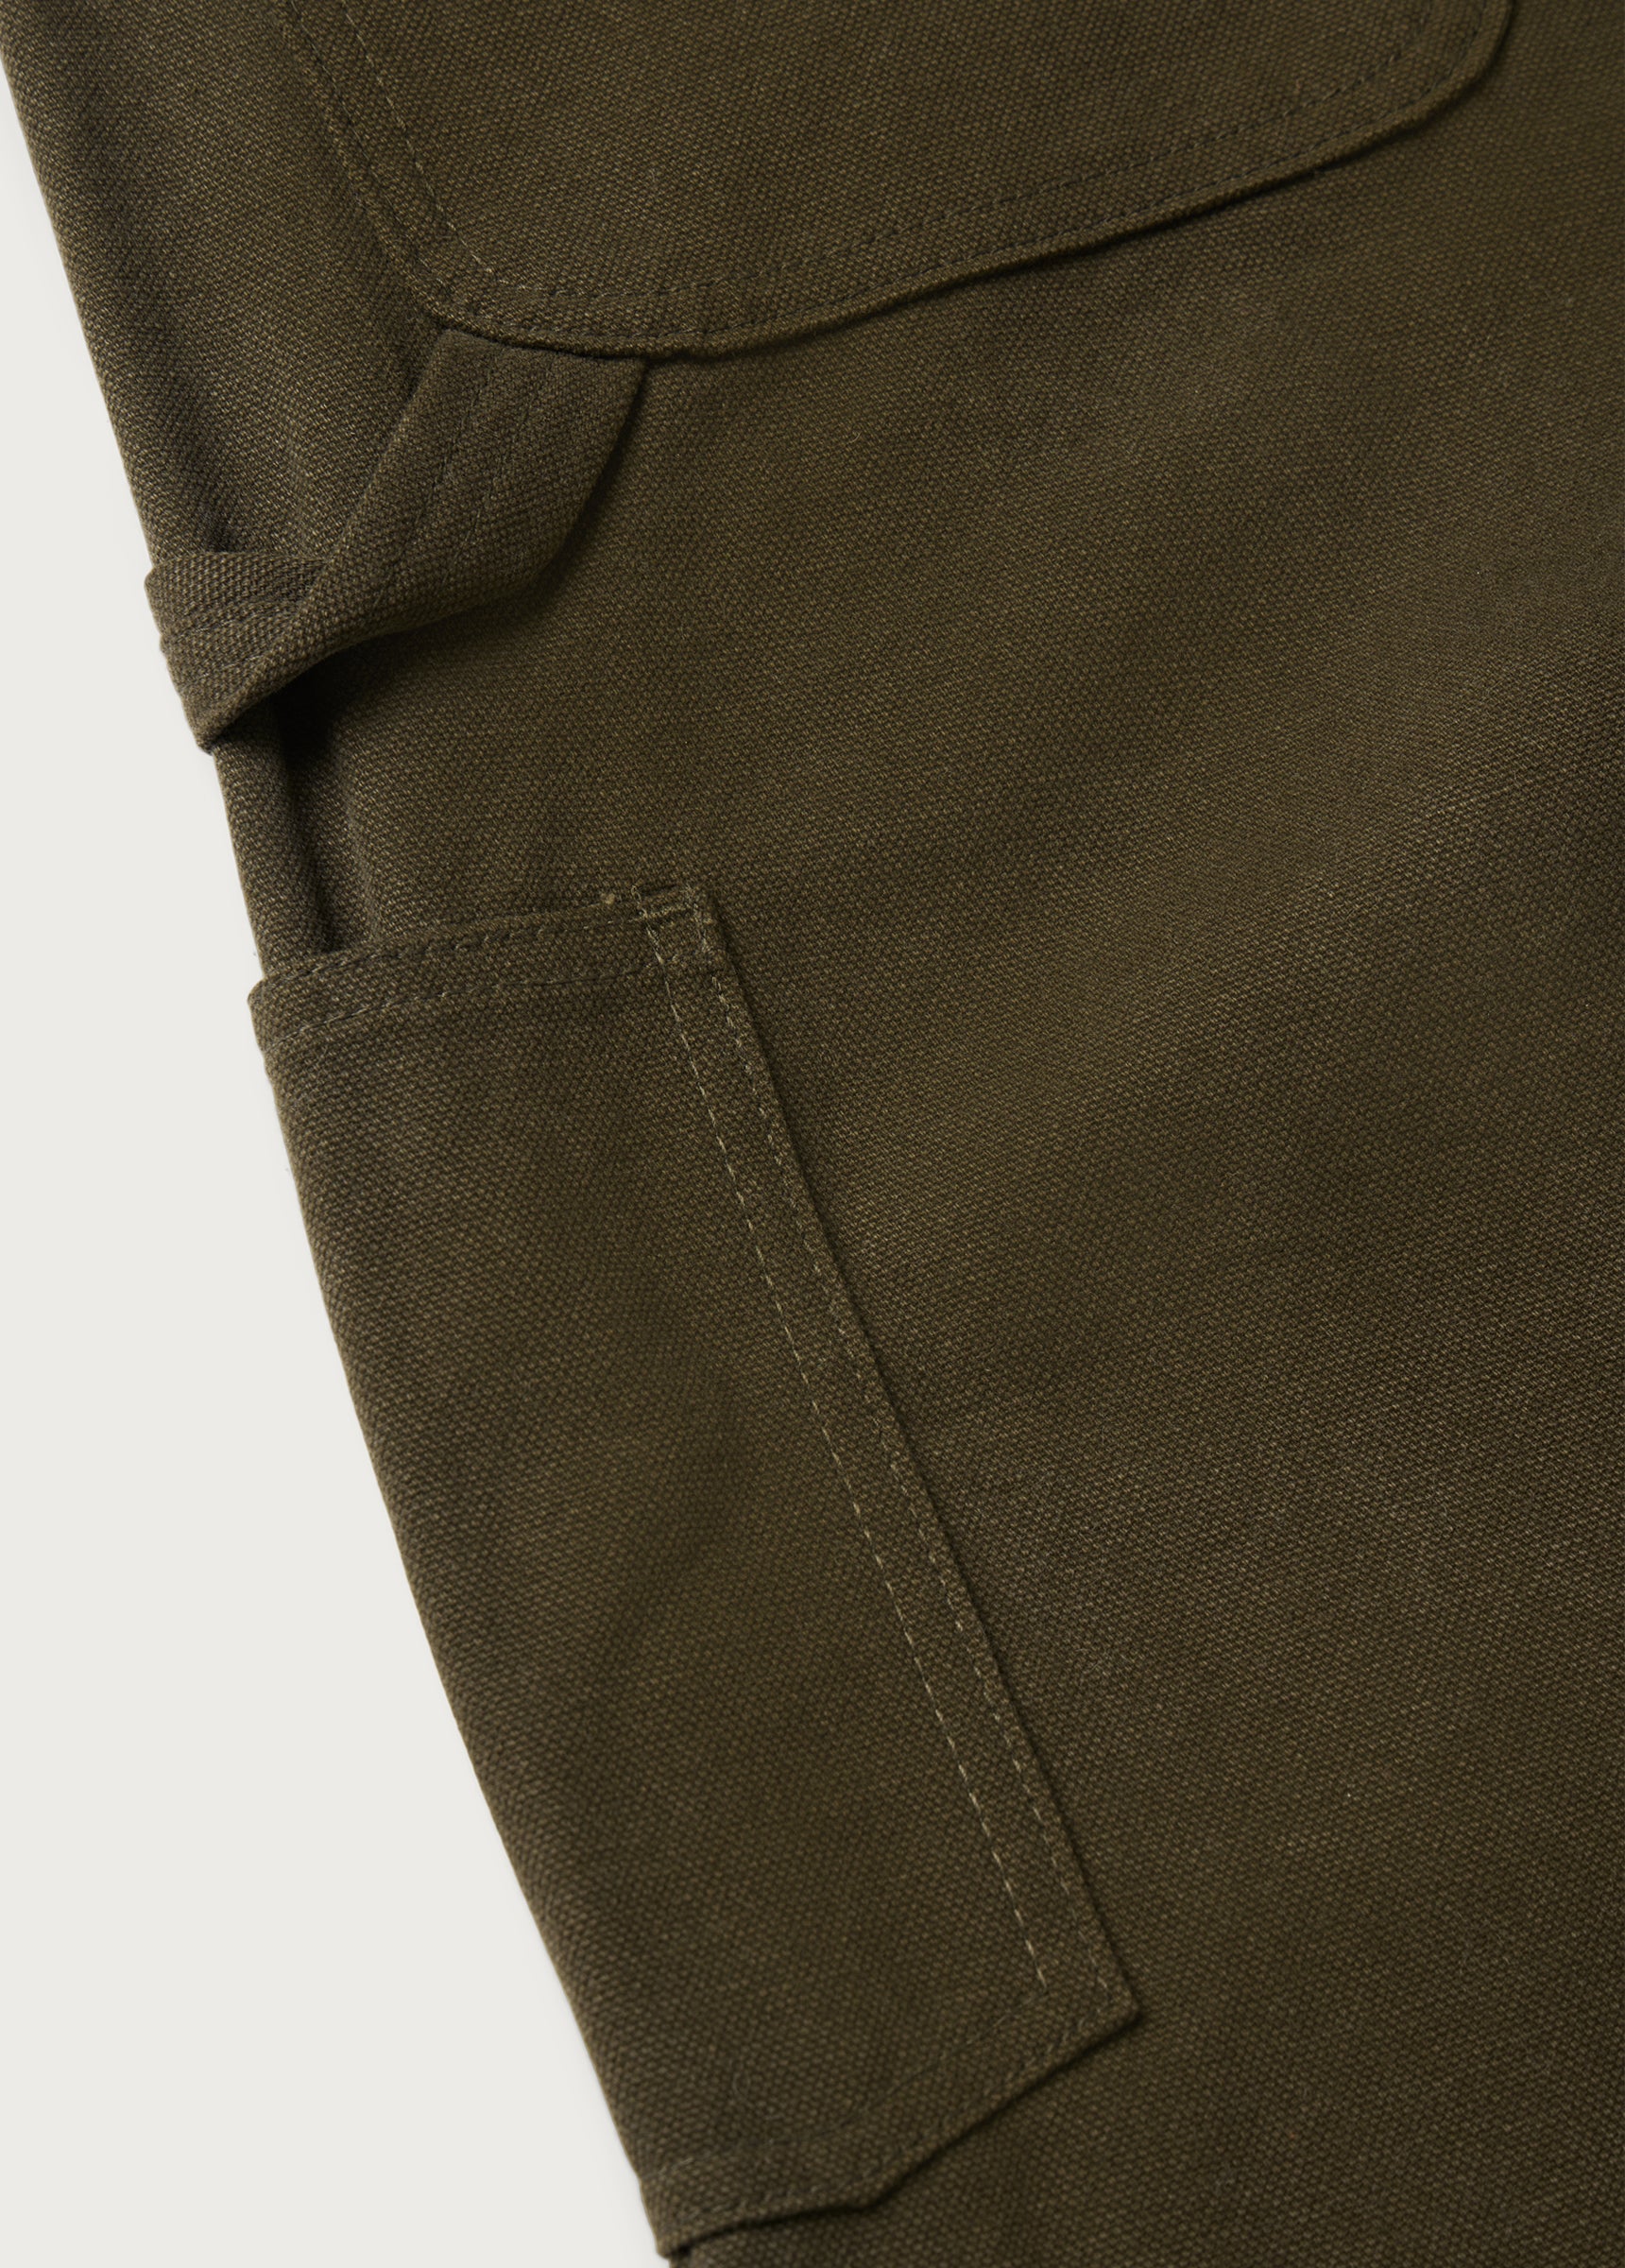 Double Knee Work Pant | Olive